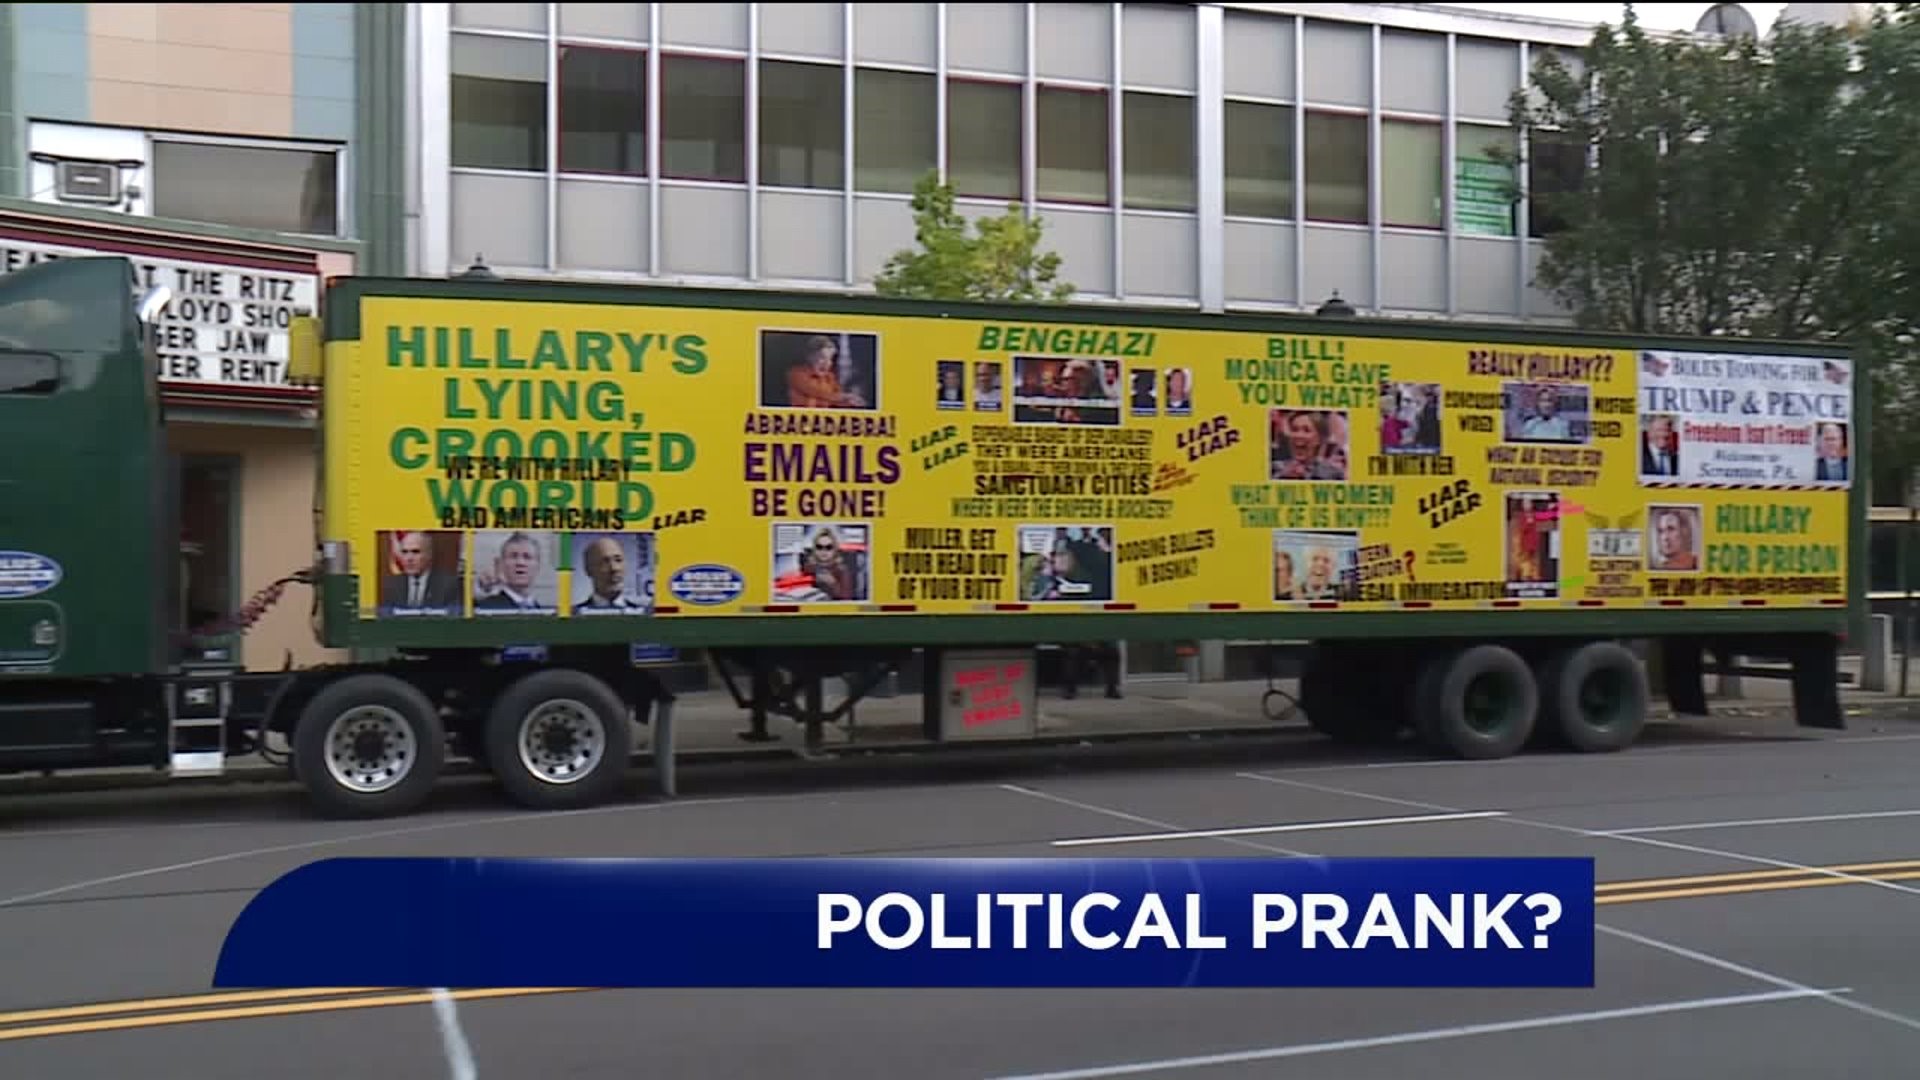 Congressman Opens New Campaign Headquarters, Tractor Trailer Slamming Representative Parks out Front